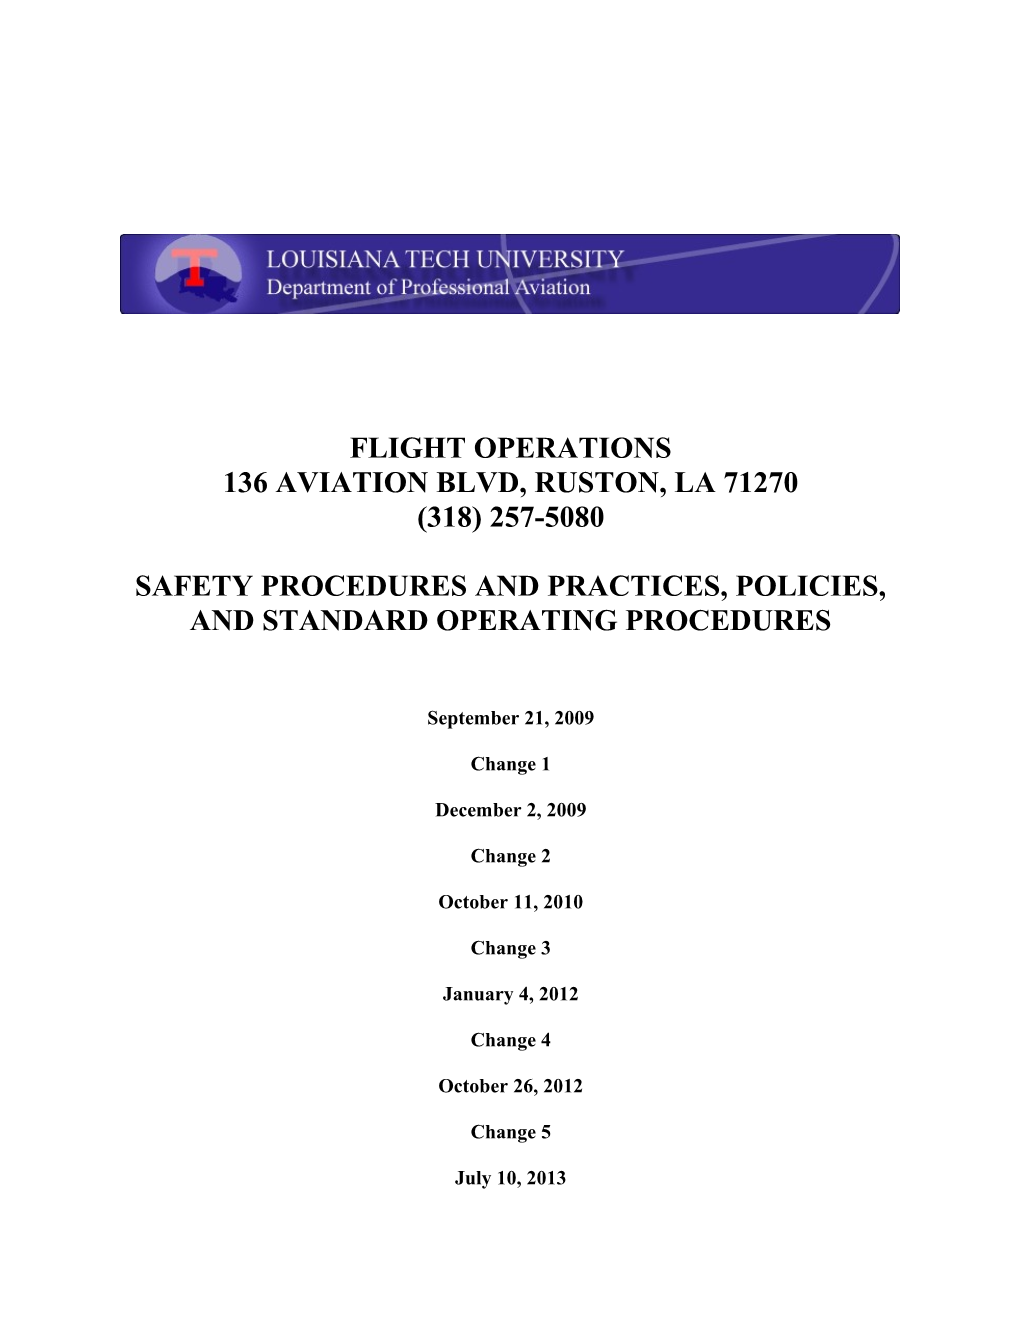 Section 1: General Flight Operations Information